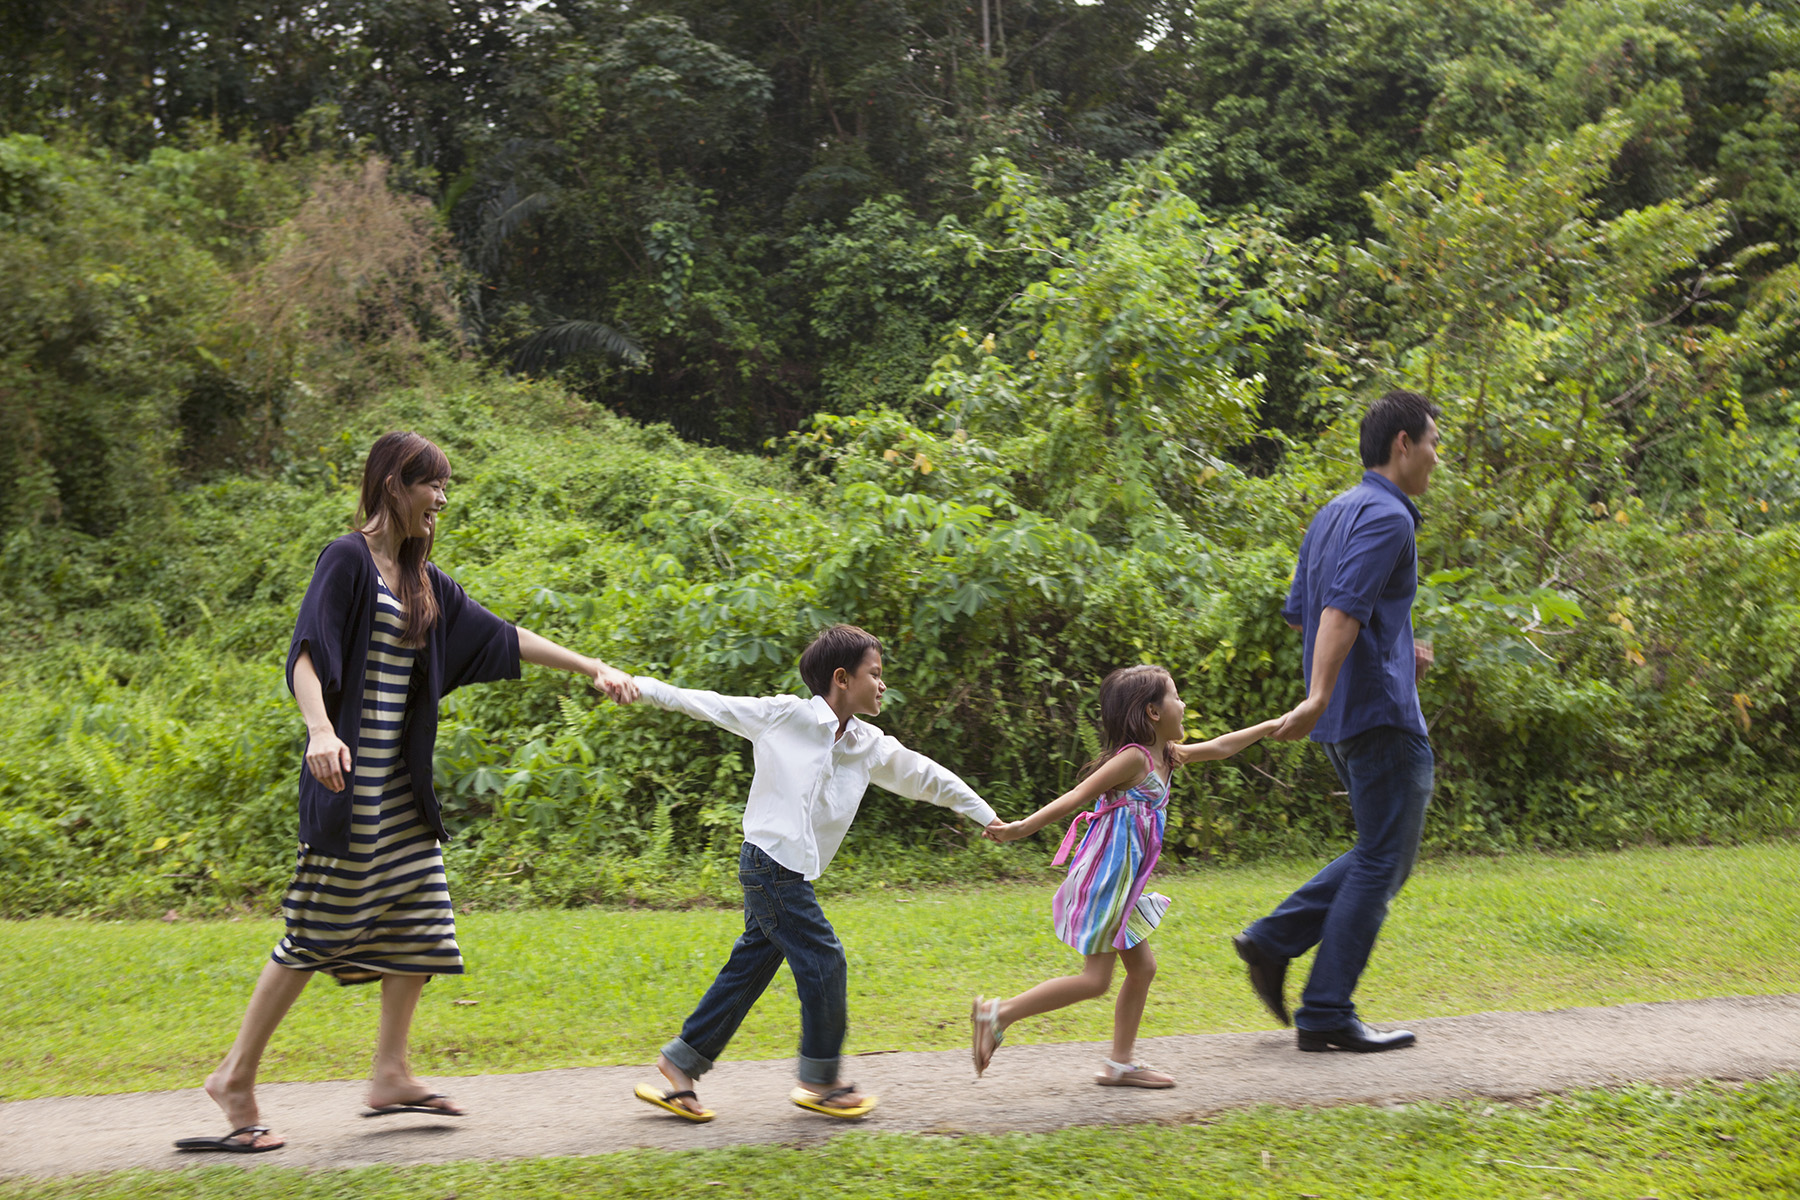 Family walks along path in a park holding hands and laughs

